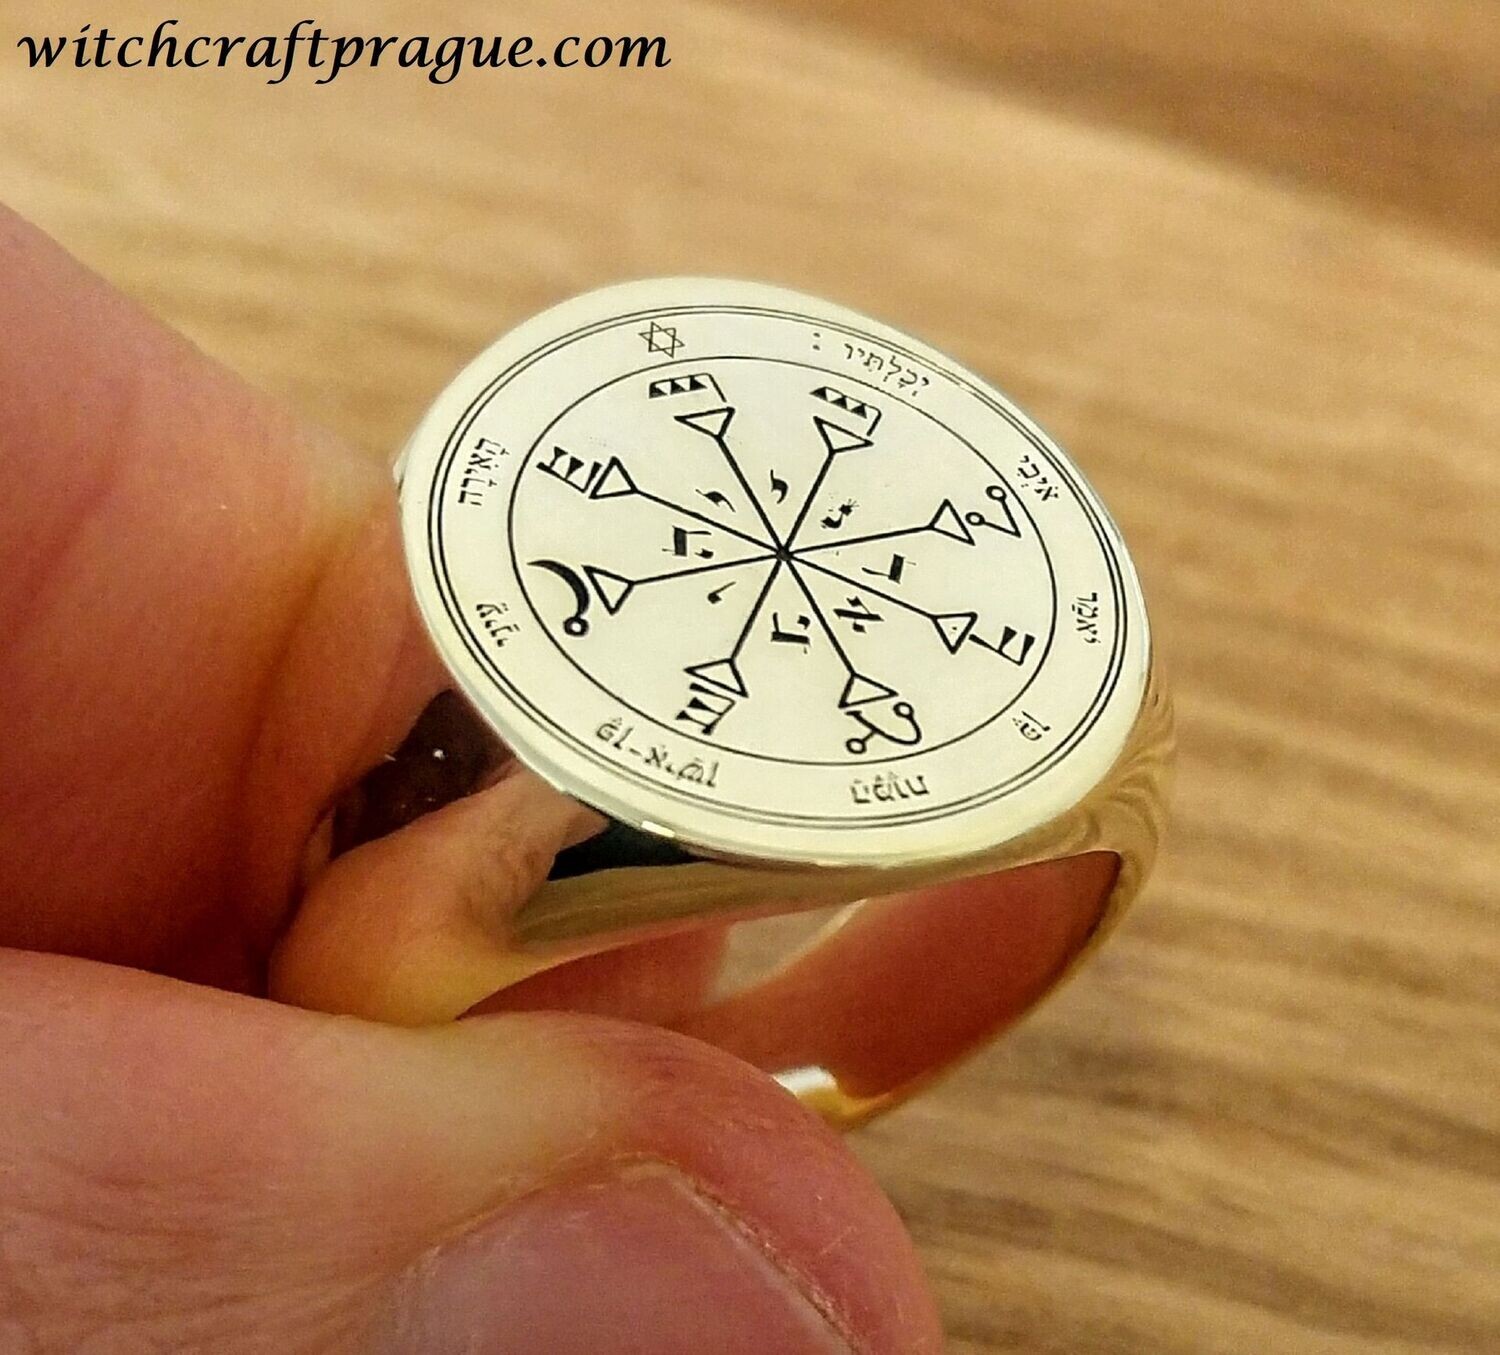 Fourth Pentacle of the Sun ring lesser key of Solomon